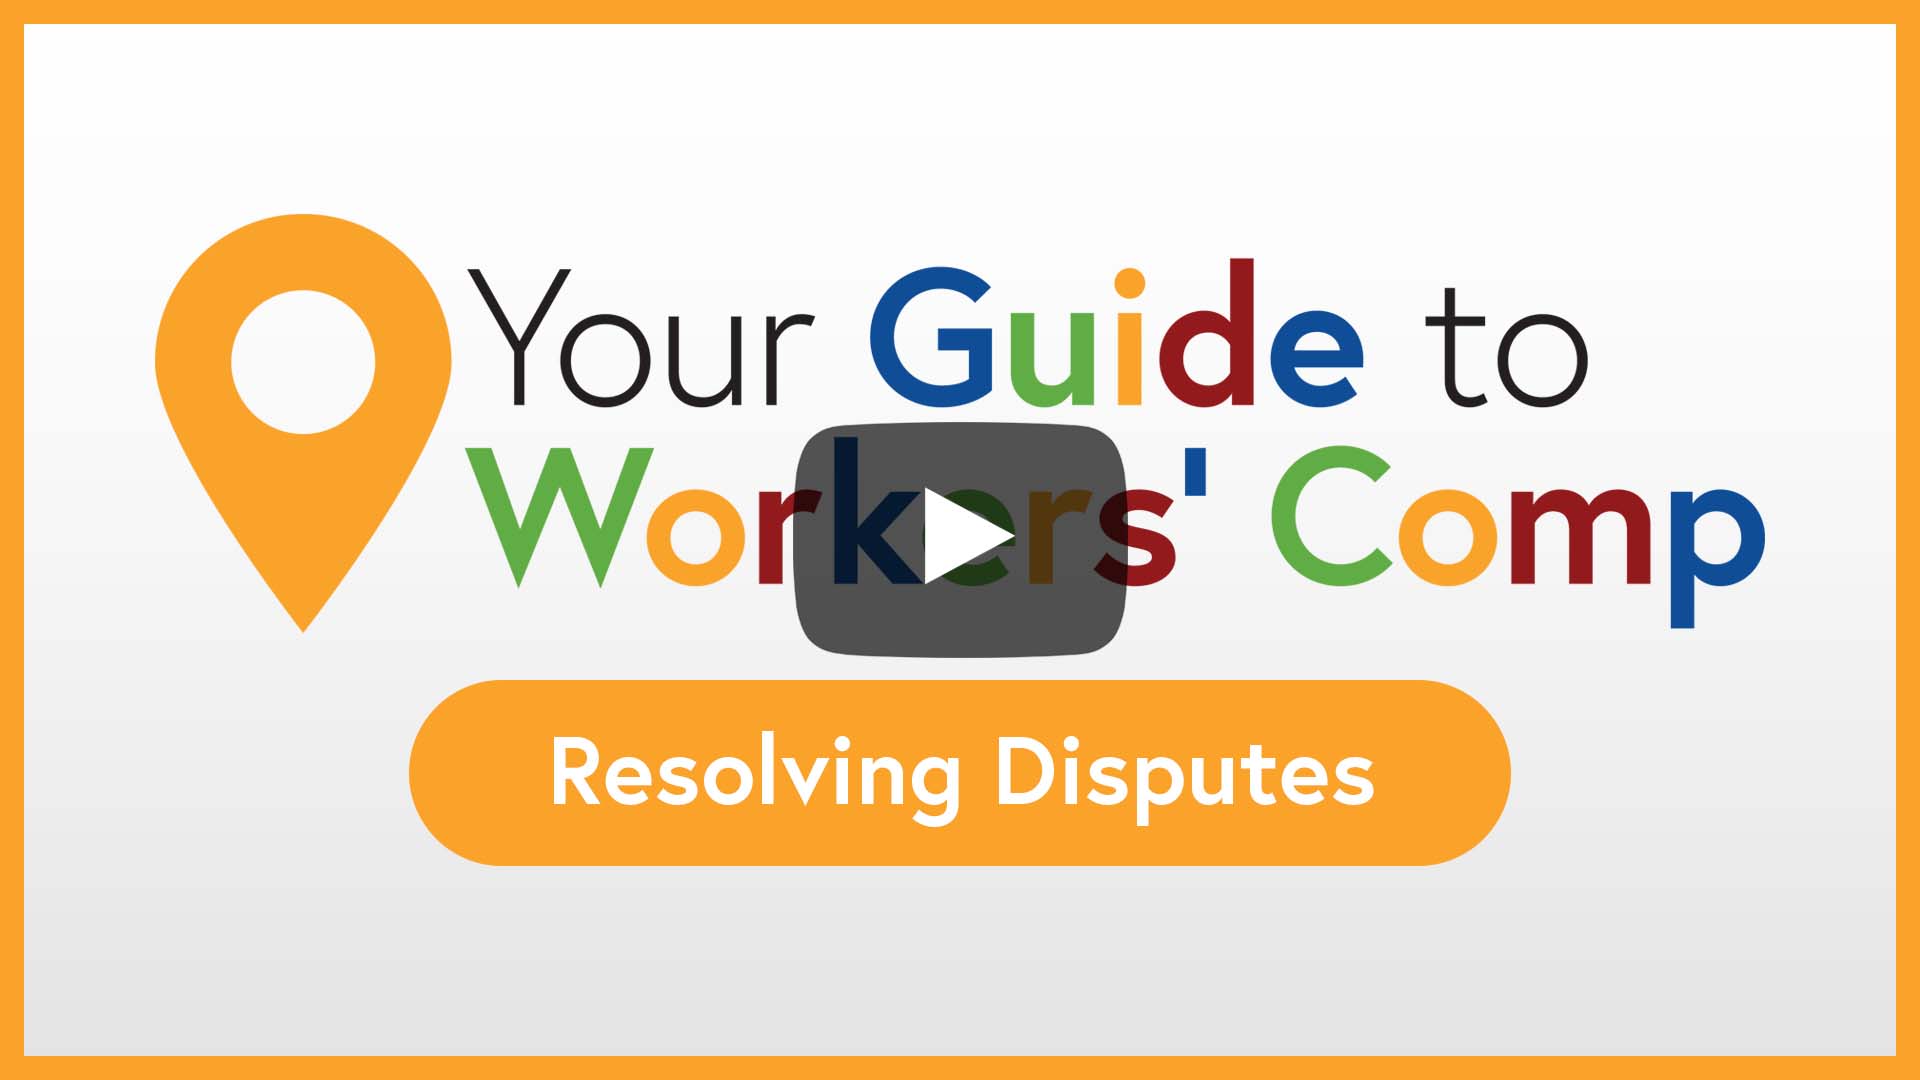 Your Guide to Workers' Comp - Resolving Disputes